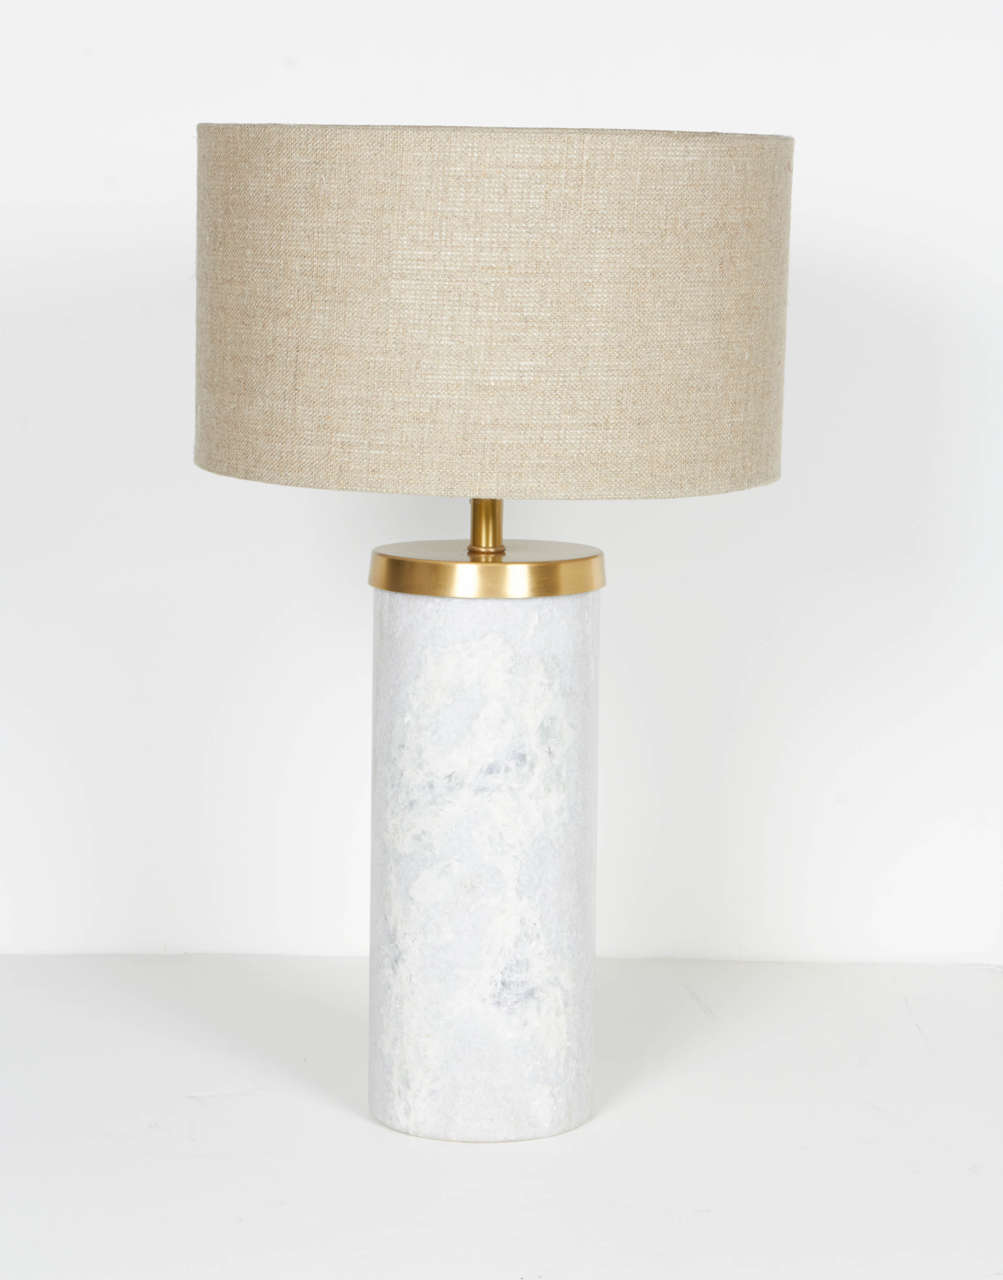 Elegant pair of solid marble table lamps or desk lamps. The lamps have a modern streamline cylinder form with a polished finish and with satin brass fittings. Shown with small woven linen drum shades. The lamps are petite in scale, but heavy in